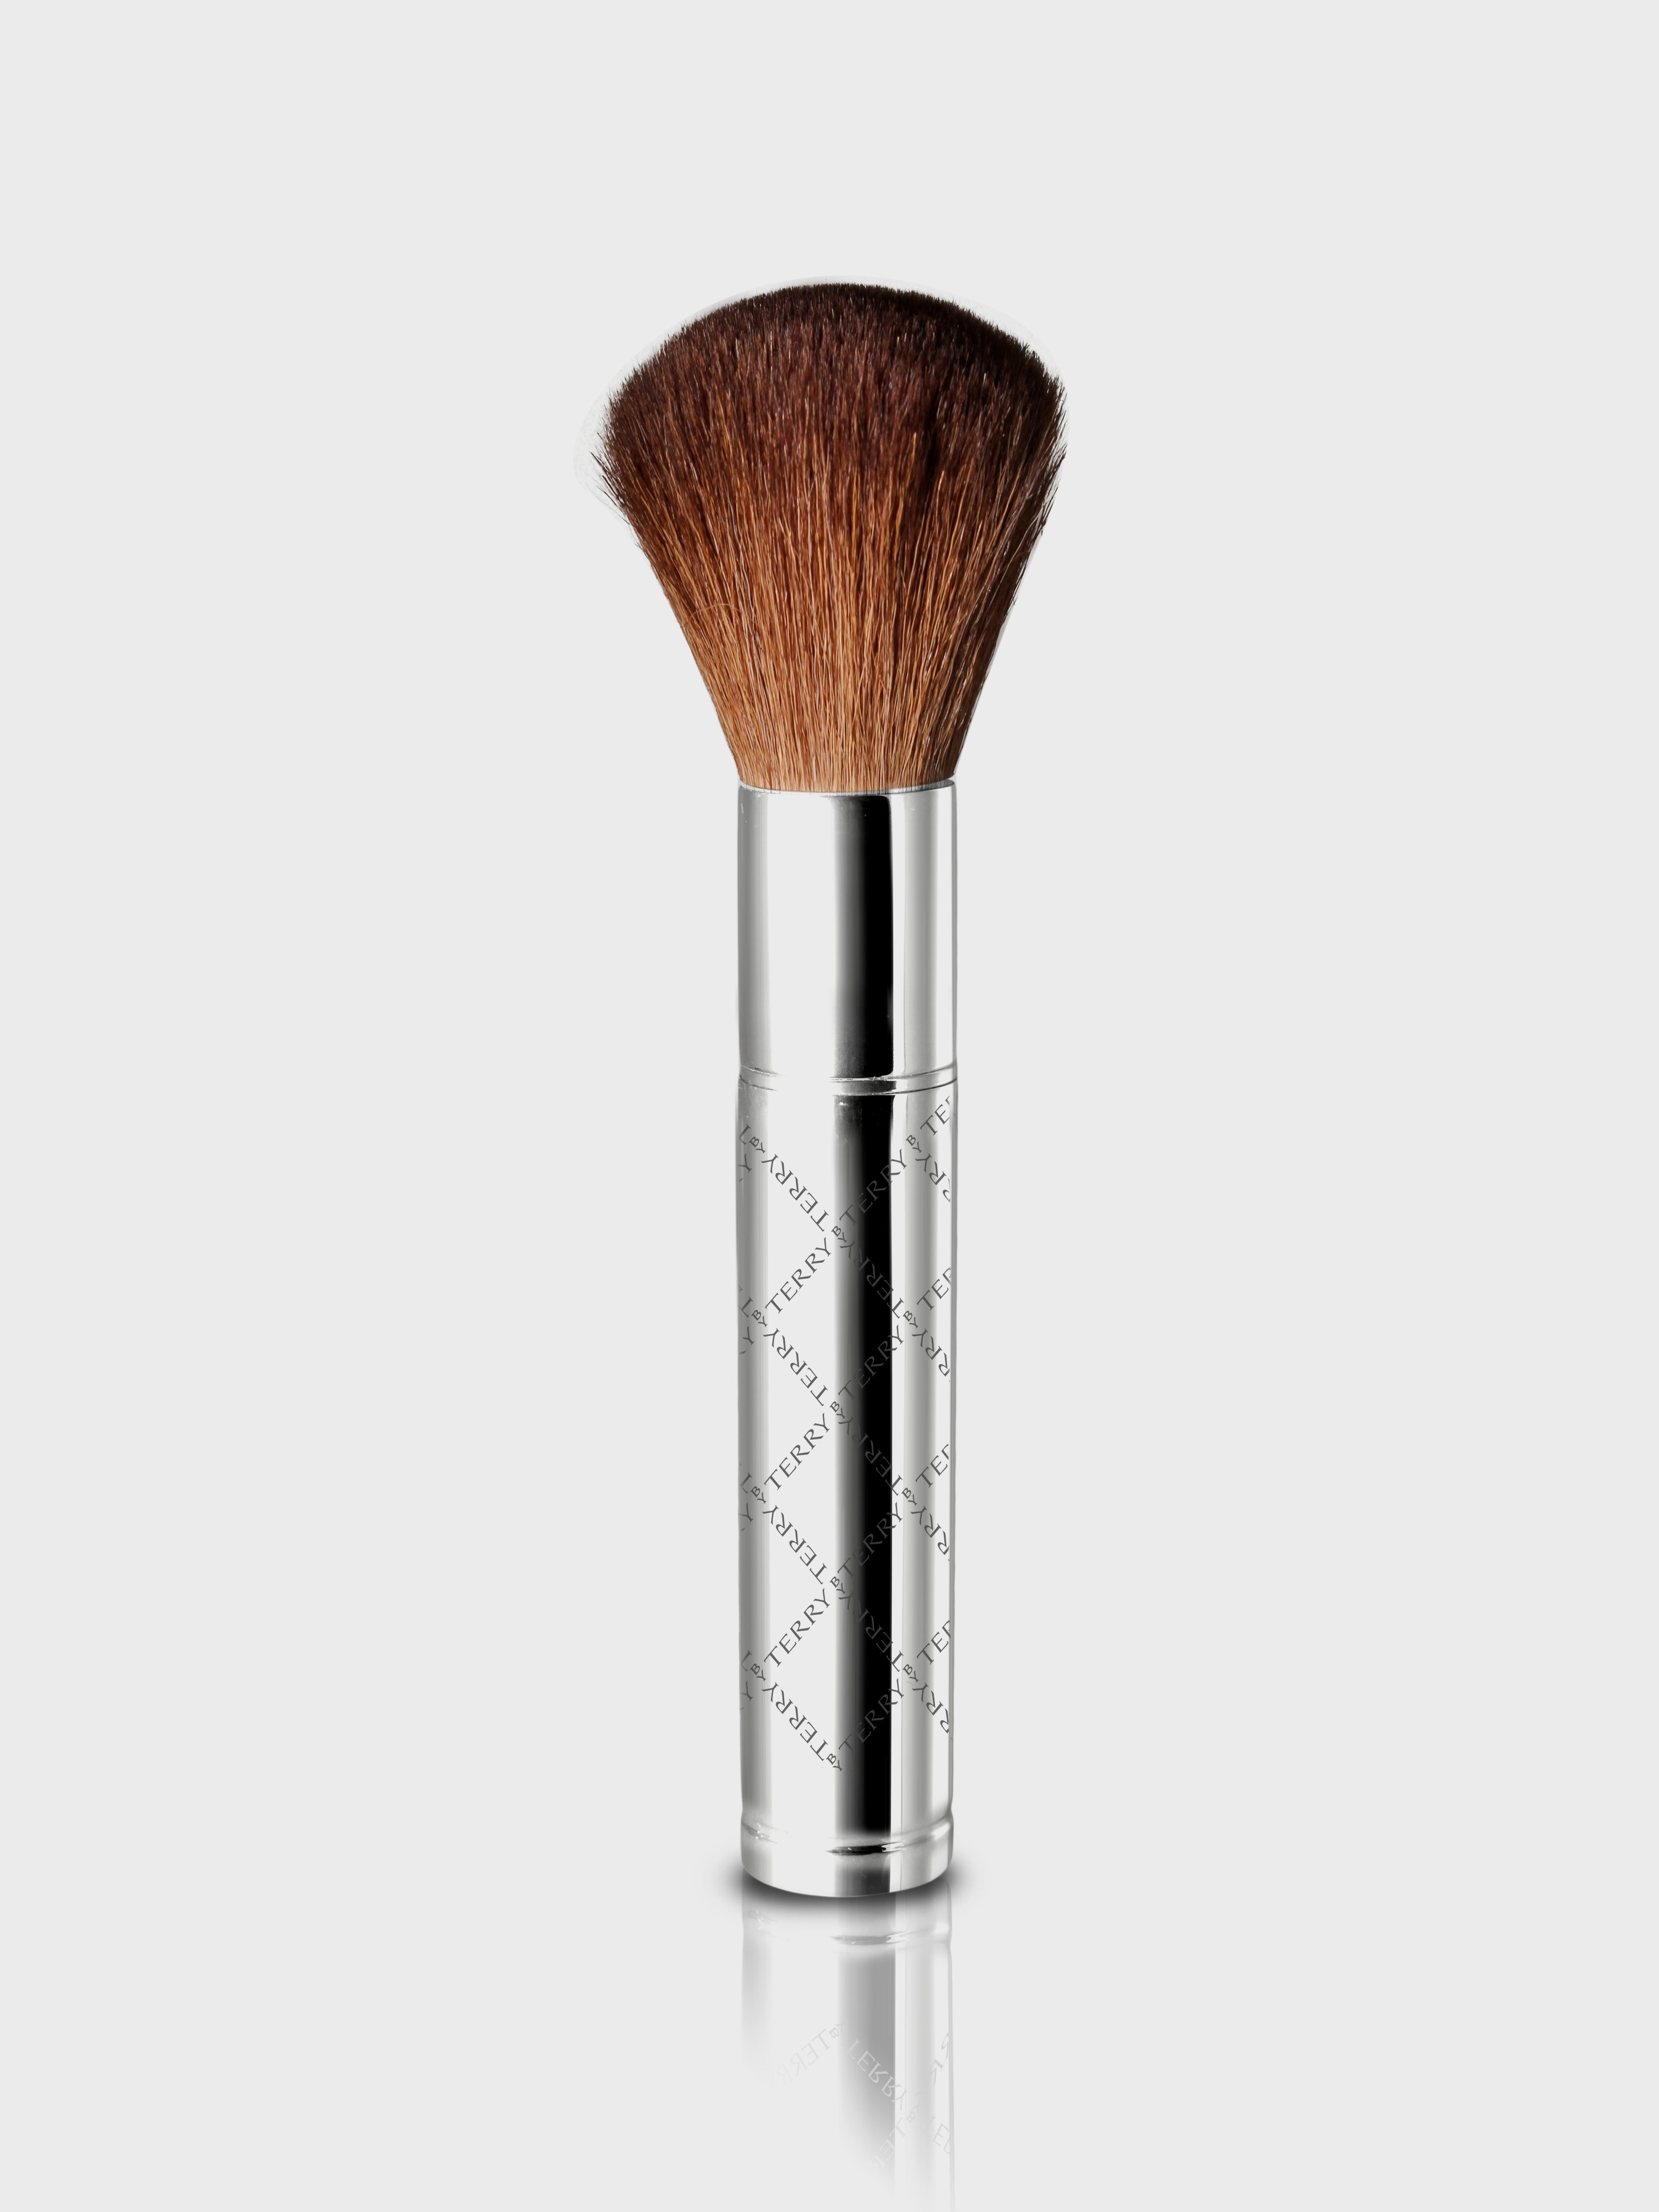 BY TERRY BY TERRY ALL OVER POWDER BRUSH